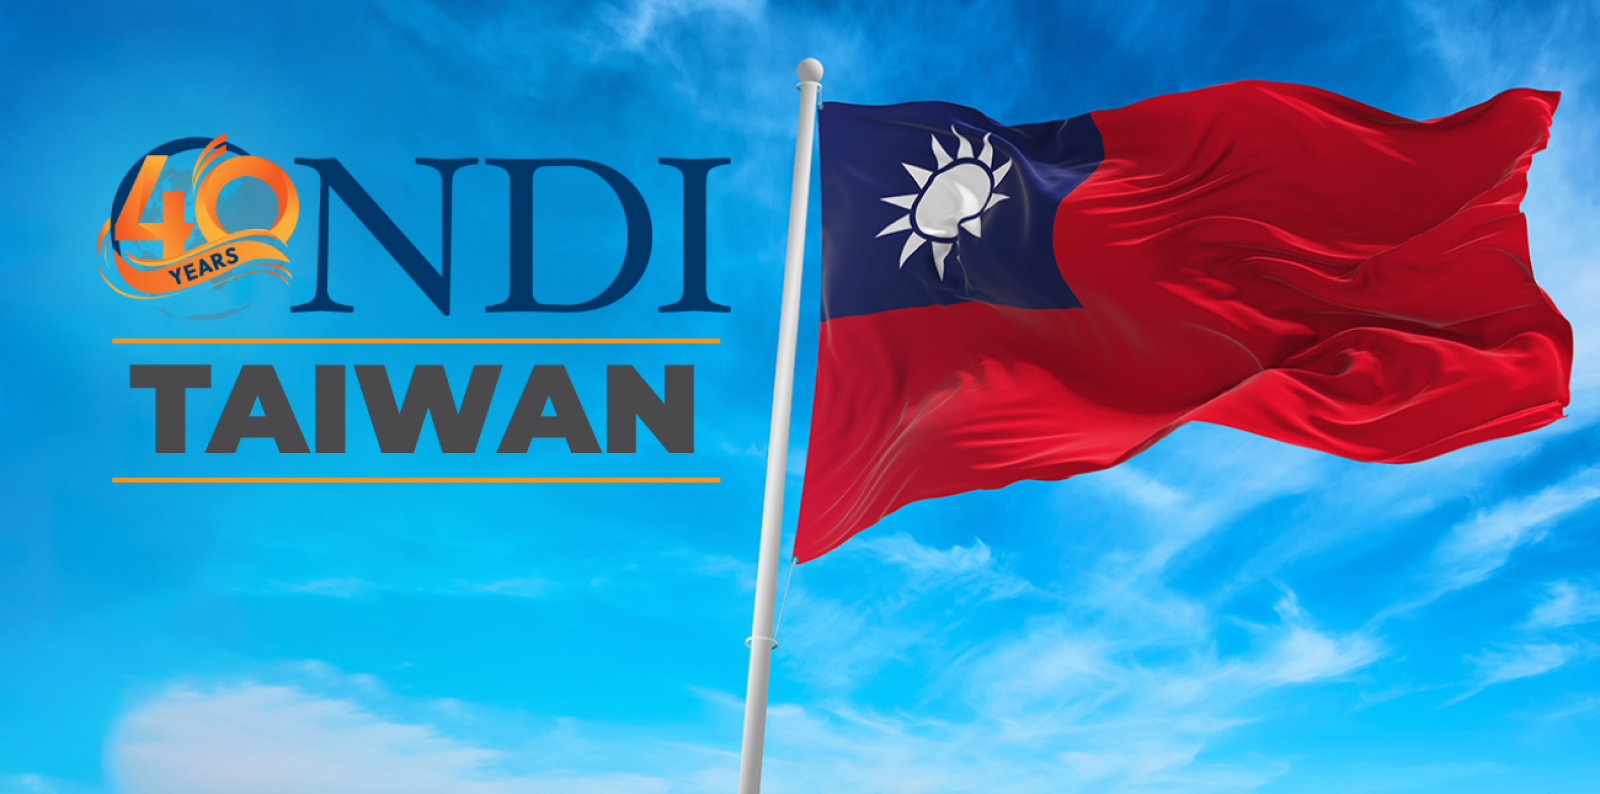 NDI: Engaging Political Parties in Taiwan Since 1986